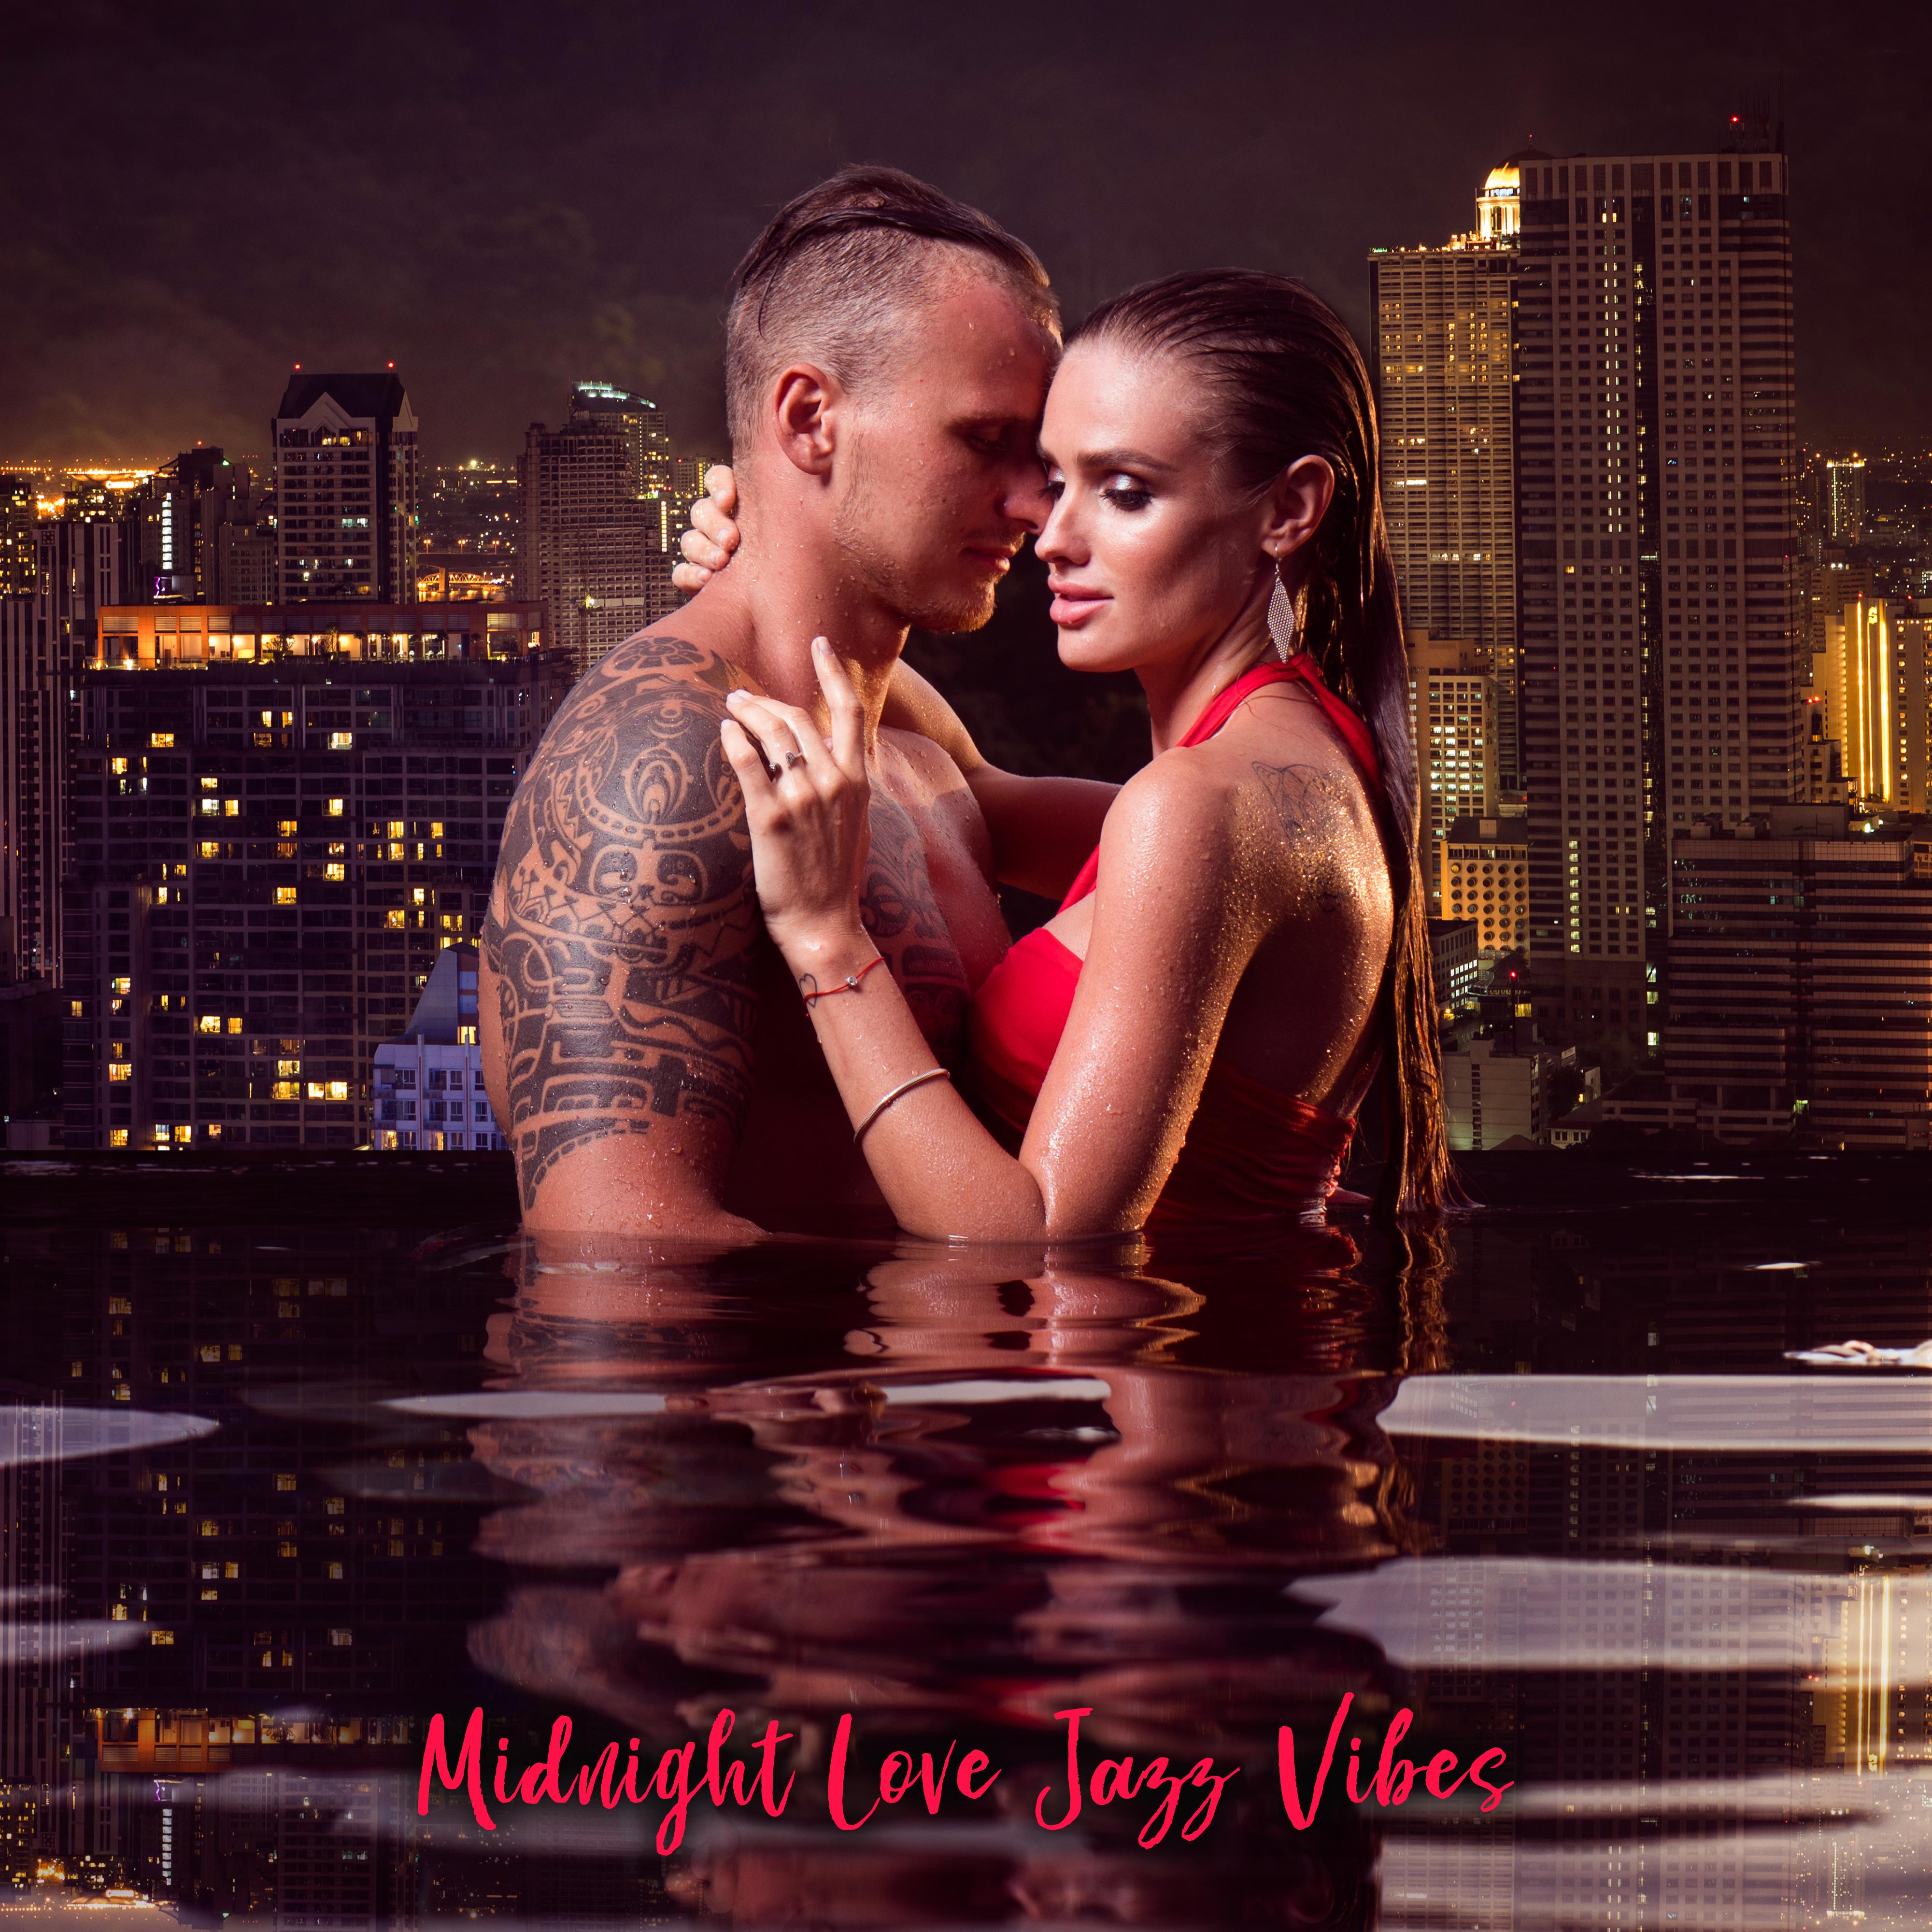 Midnight Love Jazz Vibes – 2019 Sensual Smooth Jazz Music for Lovers, Romantic Evening, Erotic Massage, Hot Bath Together, Tantric *** Sounds